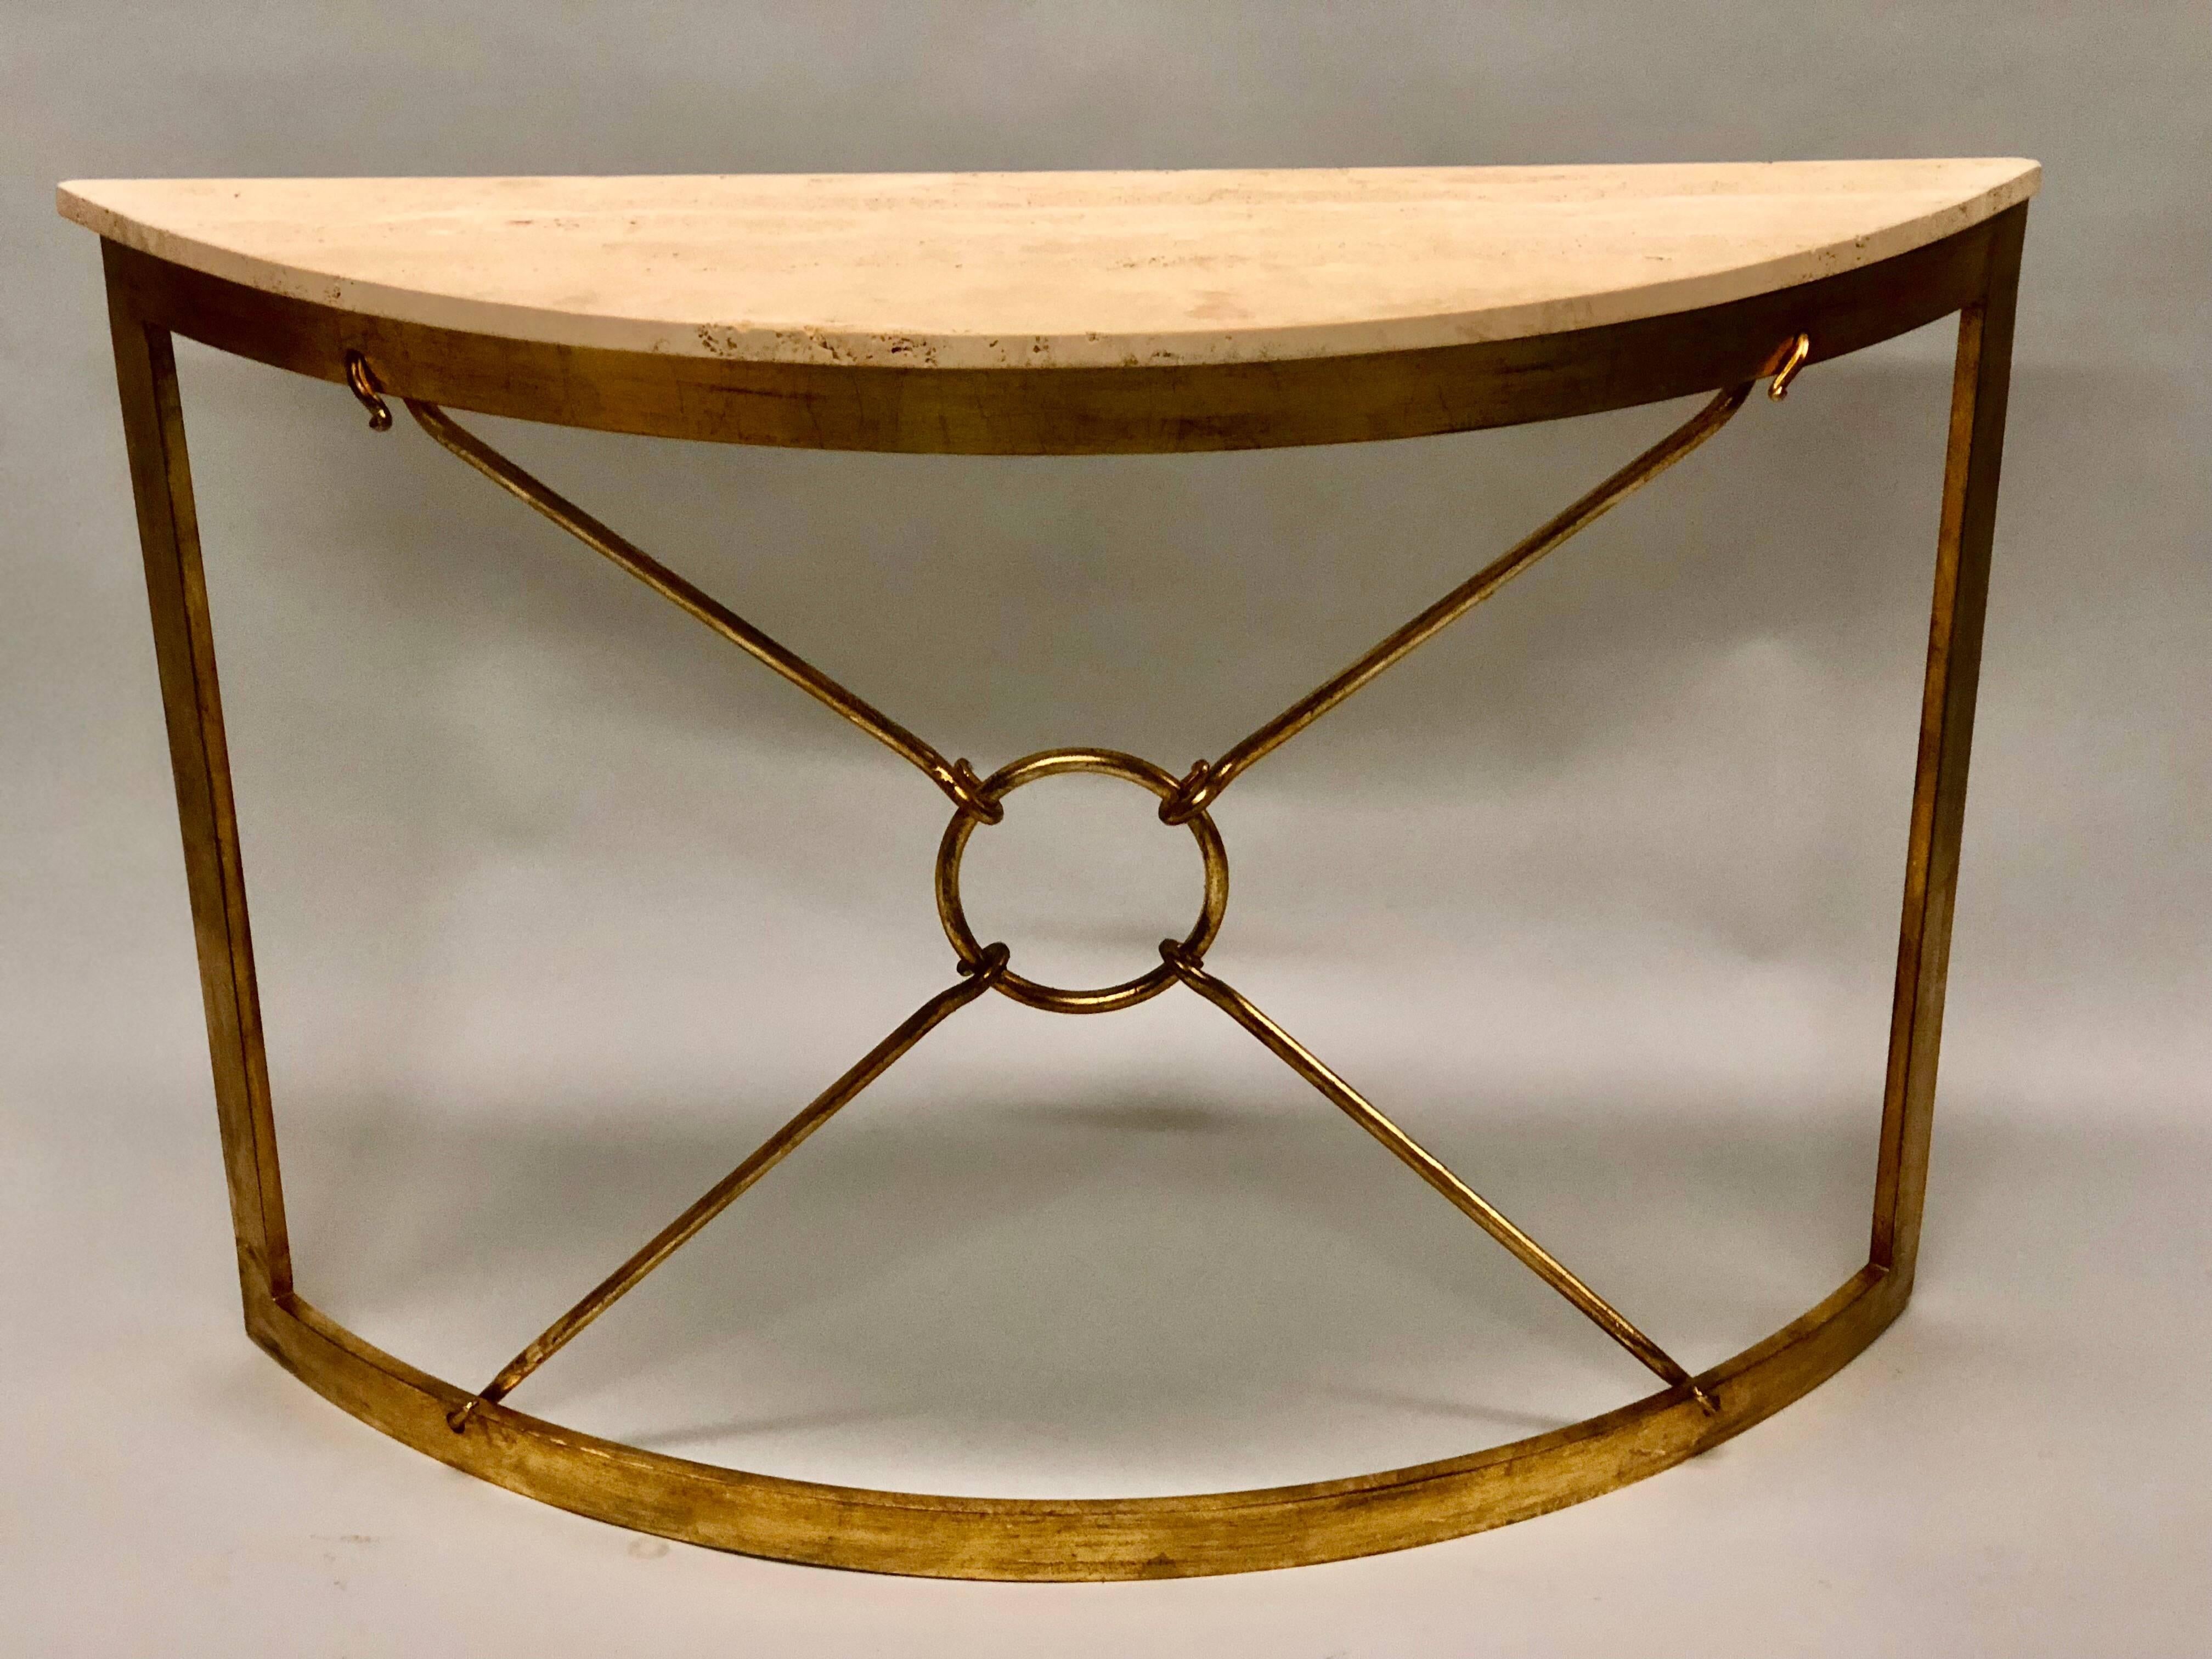 20th Century 2 Italian Modern Neoclassical Gilt Iron Demi-lune Console by Gio Banci & Hermes For Sale